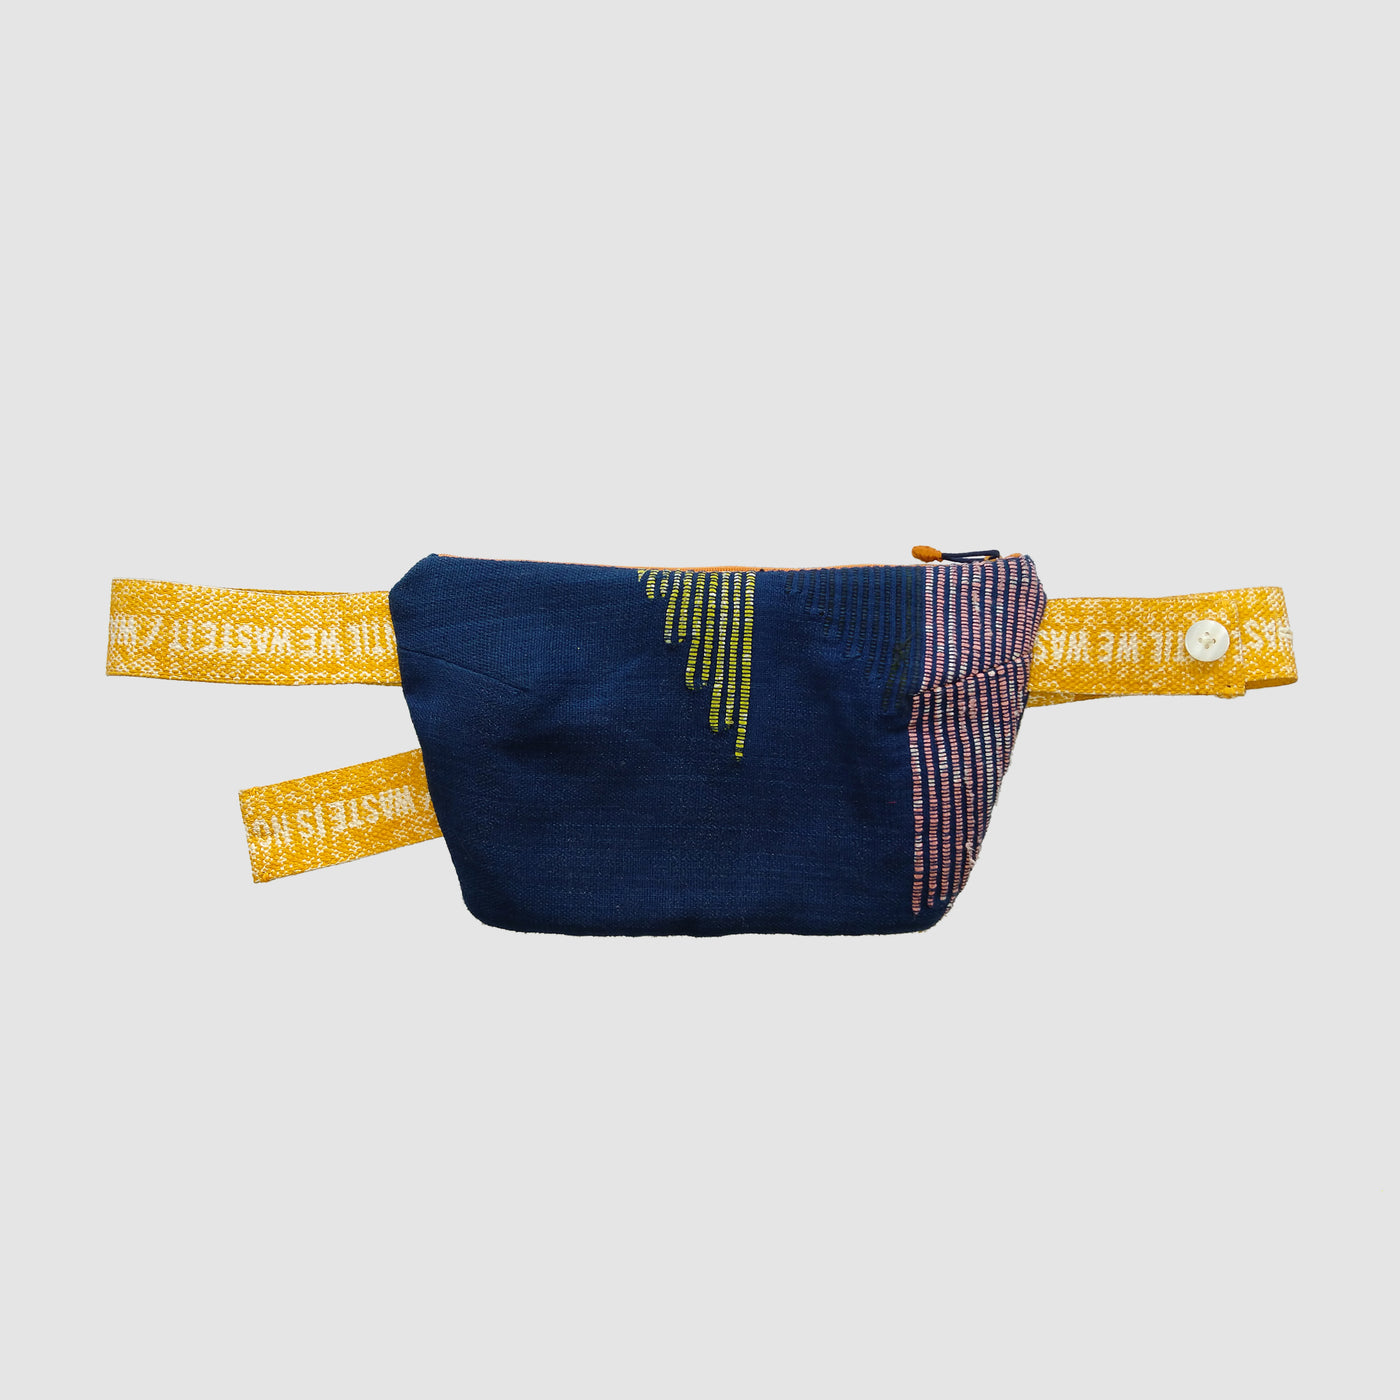 Handwoven in an extra weft technique, the waist pouch has a zip closure and an adjustable belt.